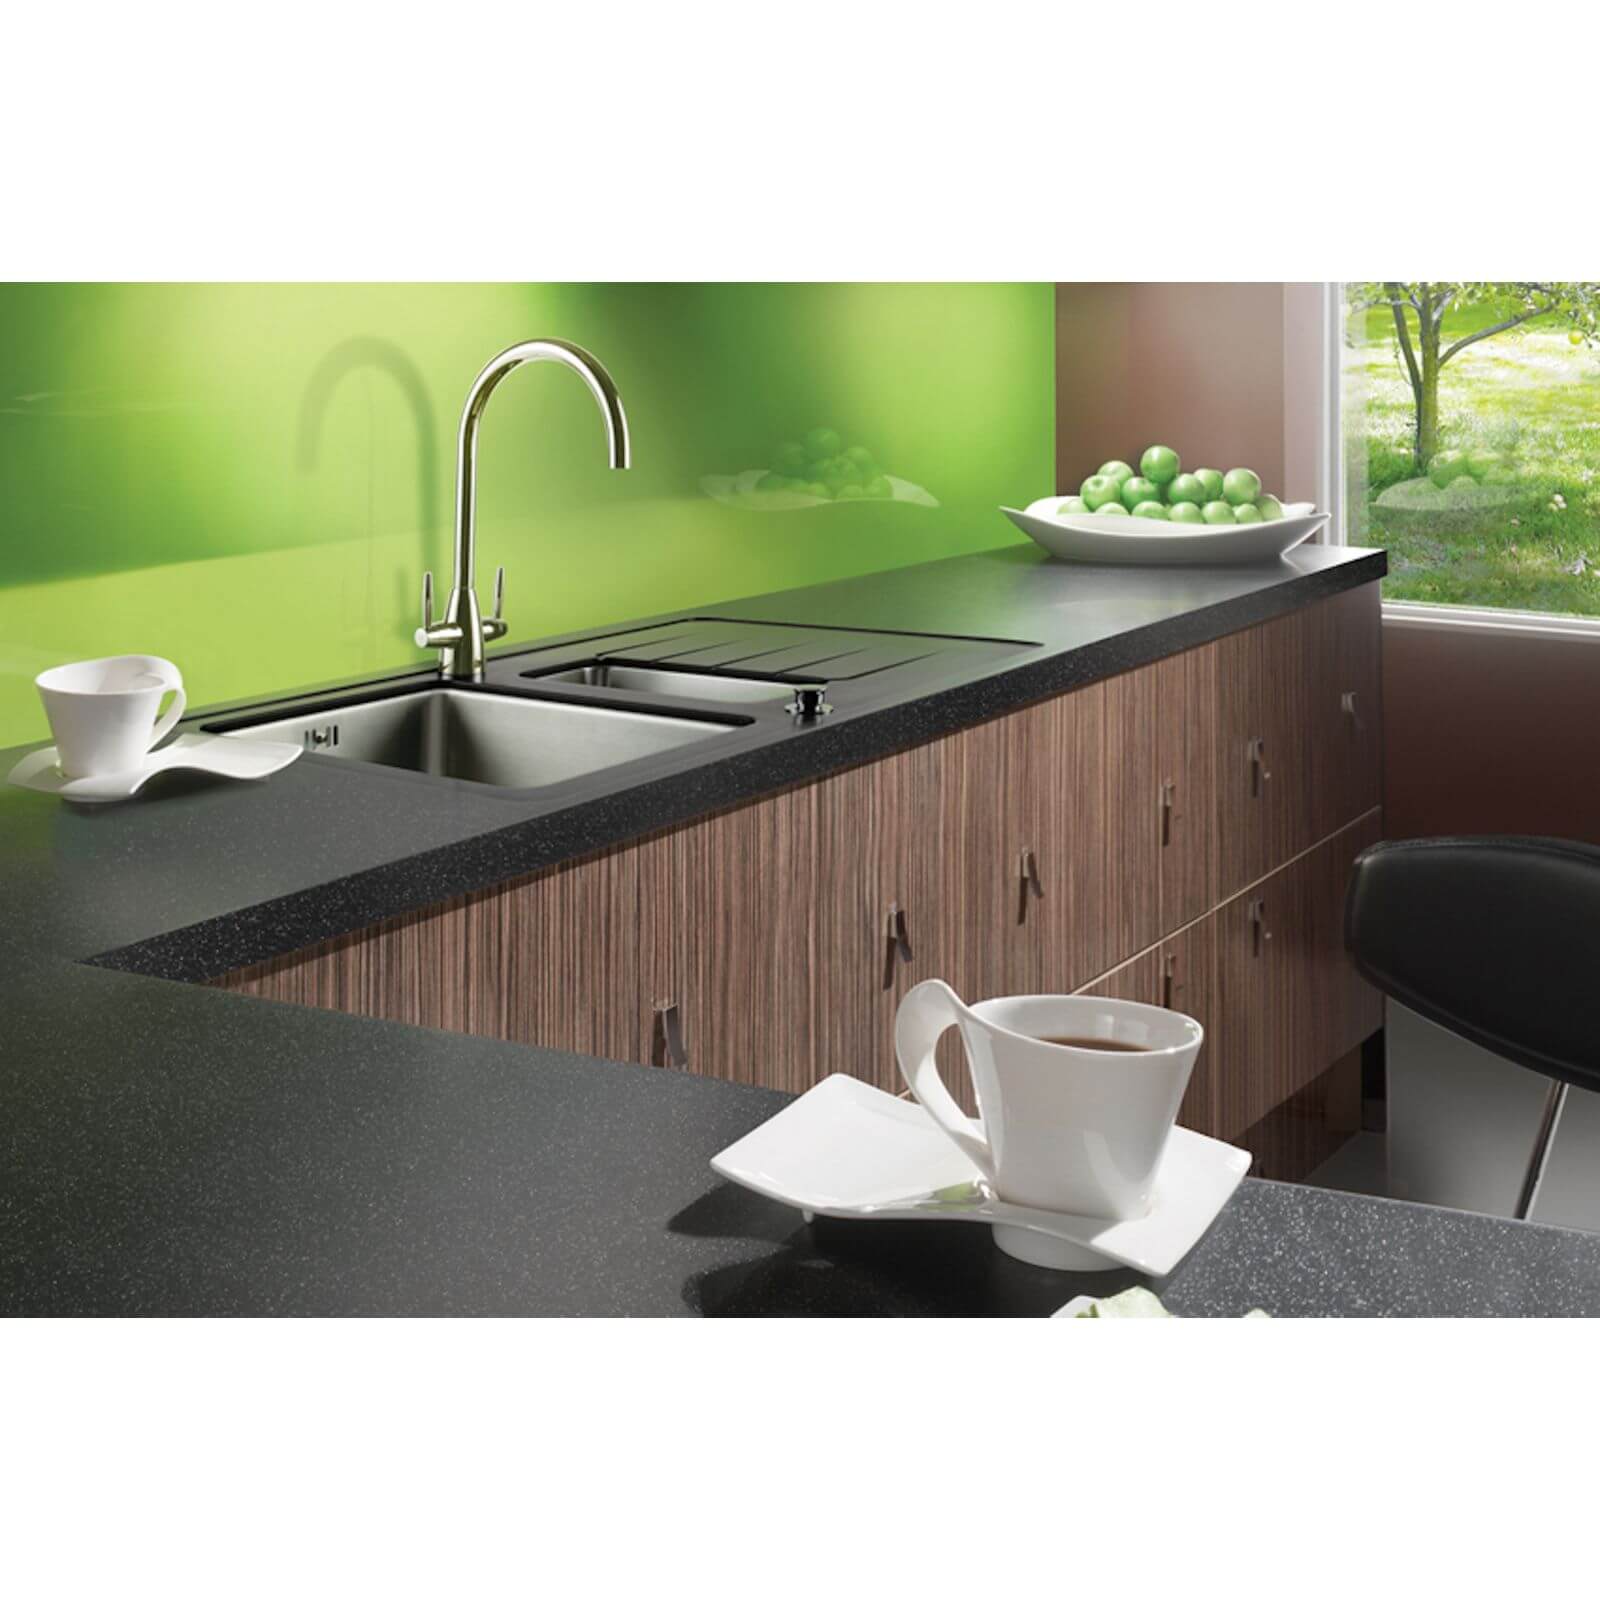 Maia Galaxy Kitchen Sink Worktop - Acrylic Super Large Right Hand Bowl - 3600 x 650 x 28mm